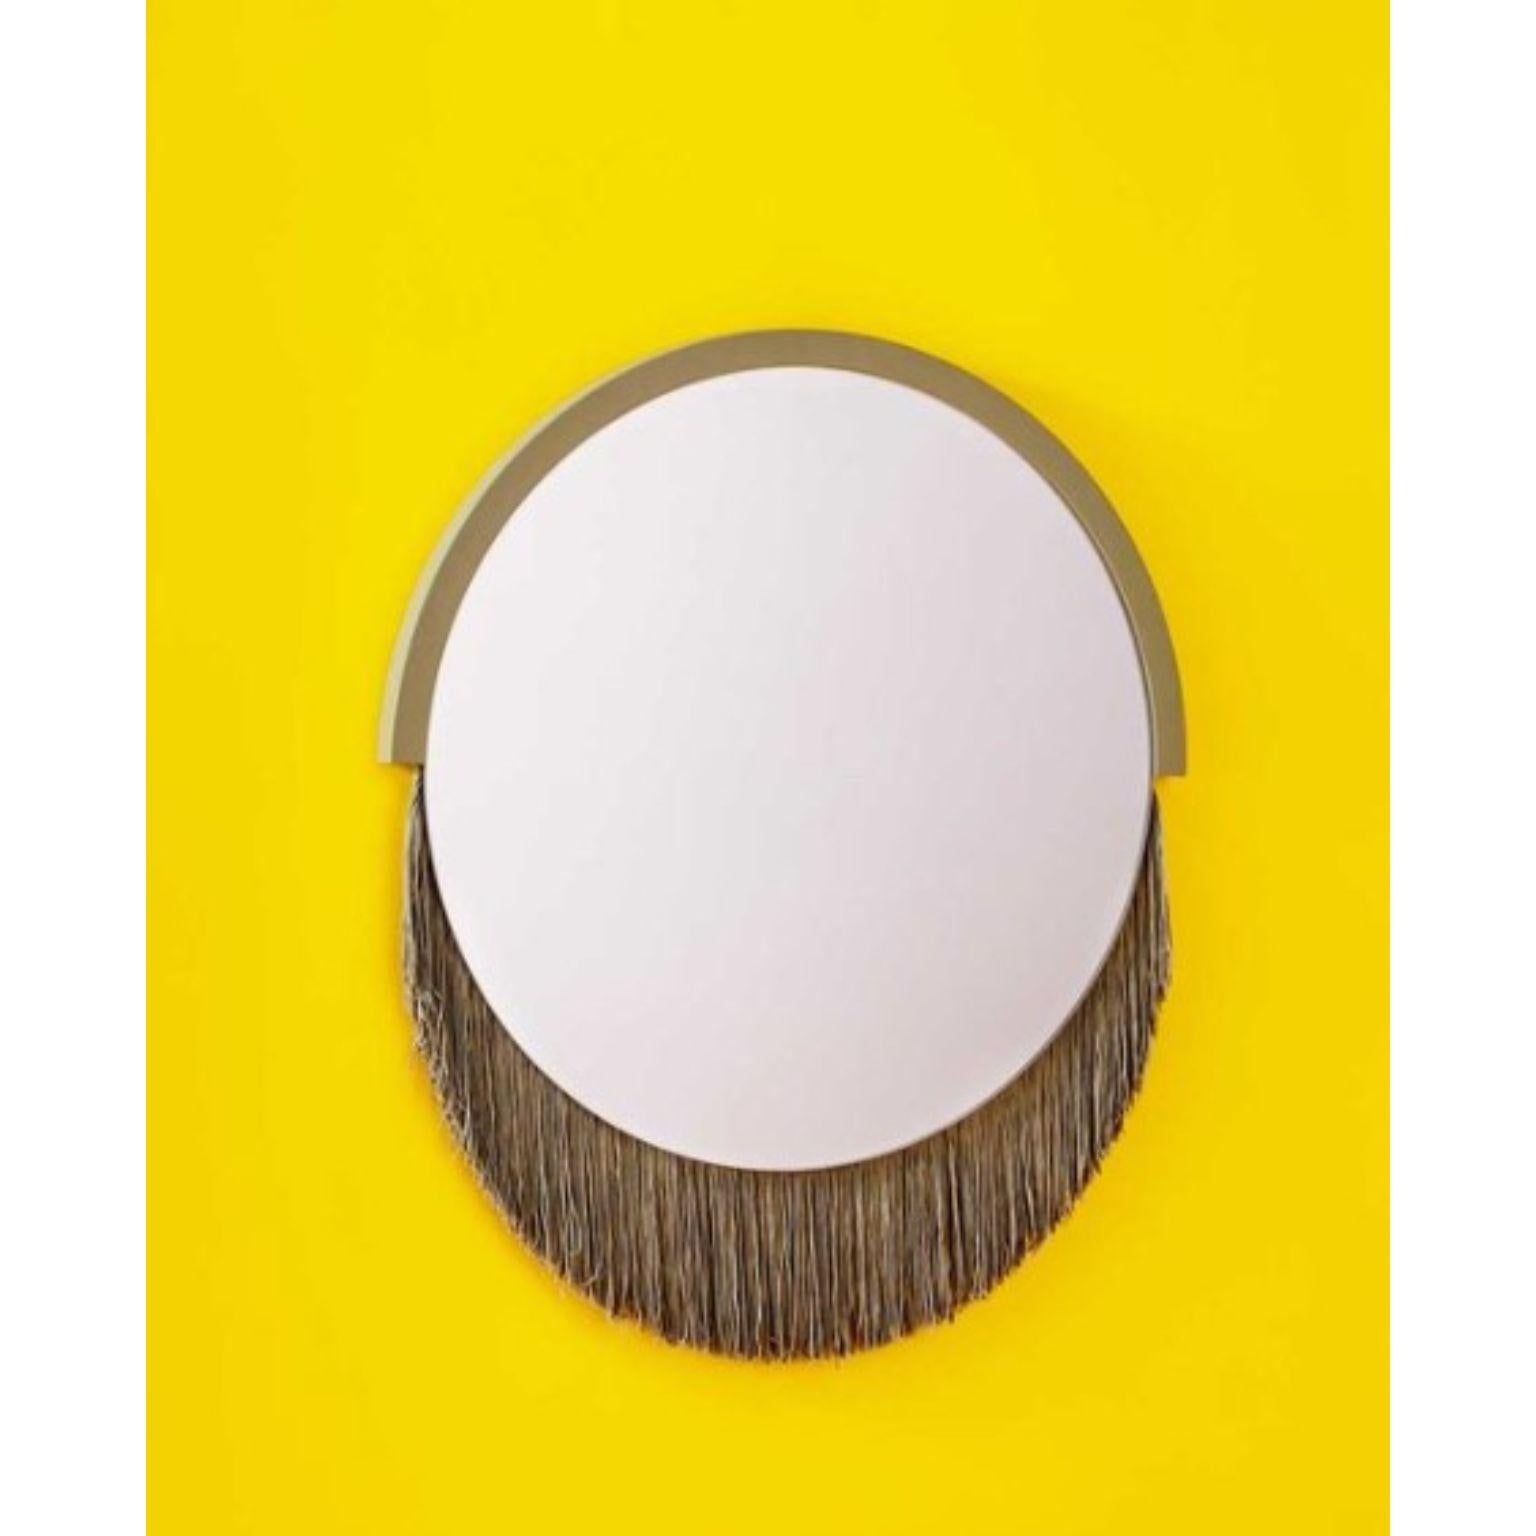 Boudoir small wall mirror by Tero Kuitunen
Material: glass mirror, mdf board, textile fringes.
Dimensions: D38 x W38 x H1.6 cm
Also Available: Different Size, models and colors.

Playful wall mirrors with fringe detail.

Designer Tero